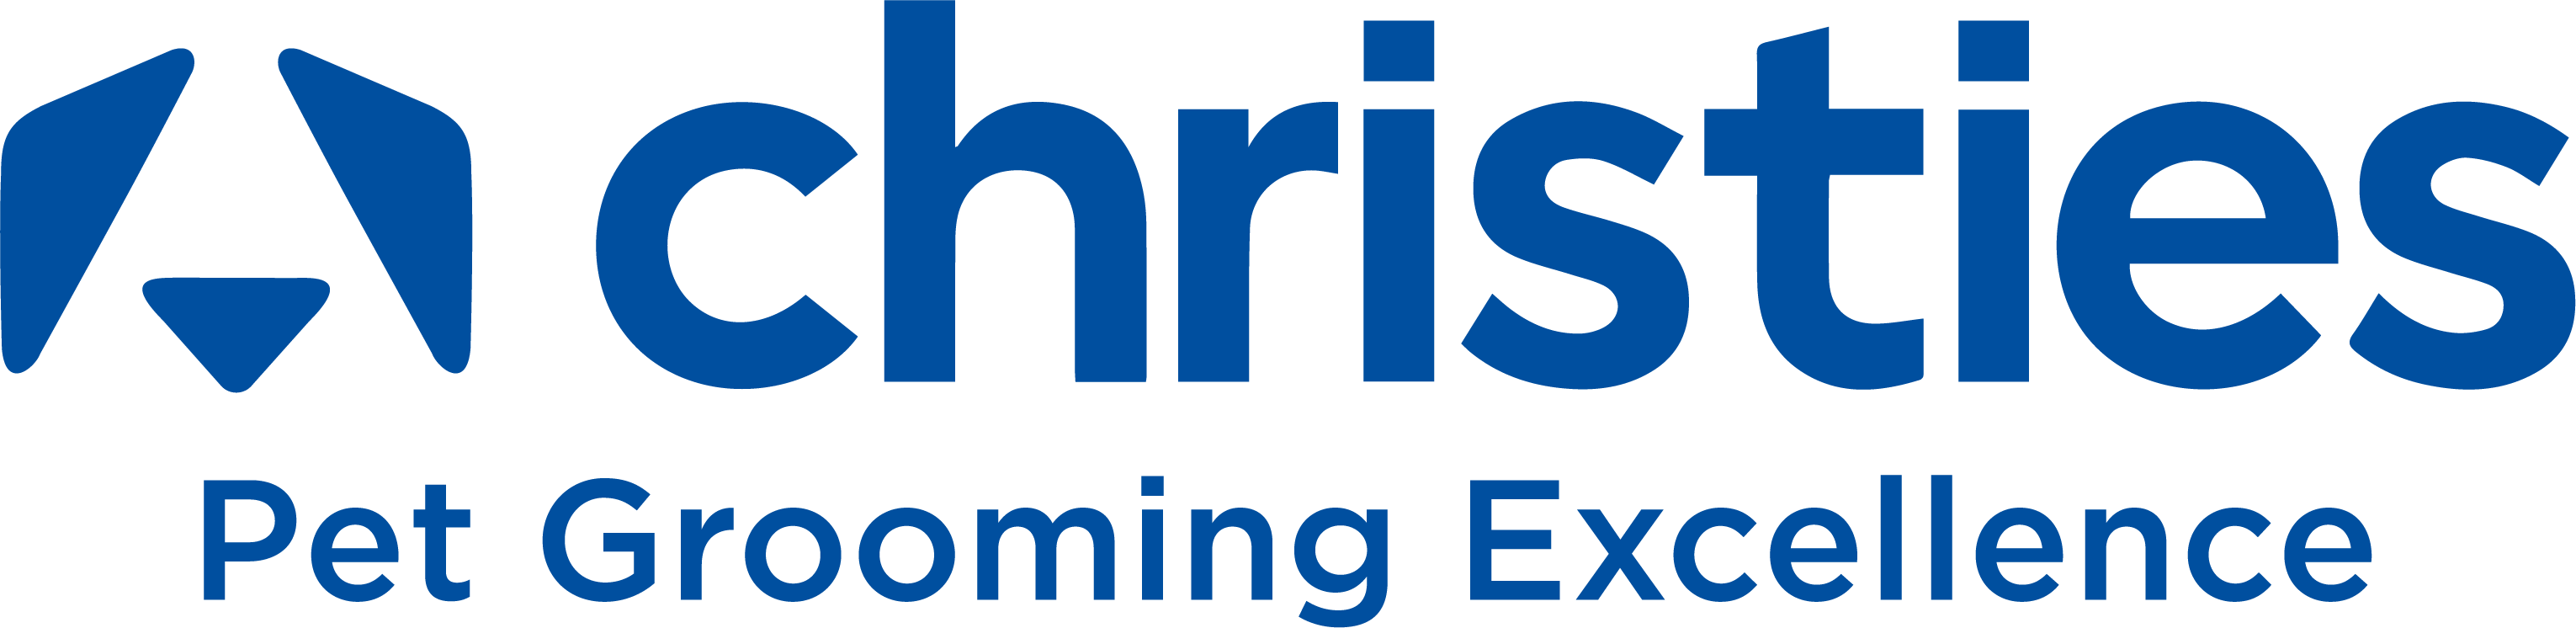 christies pet grooming excellence logo